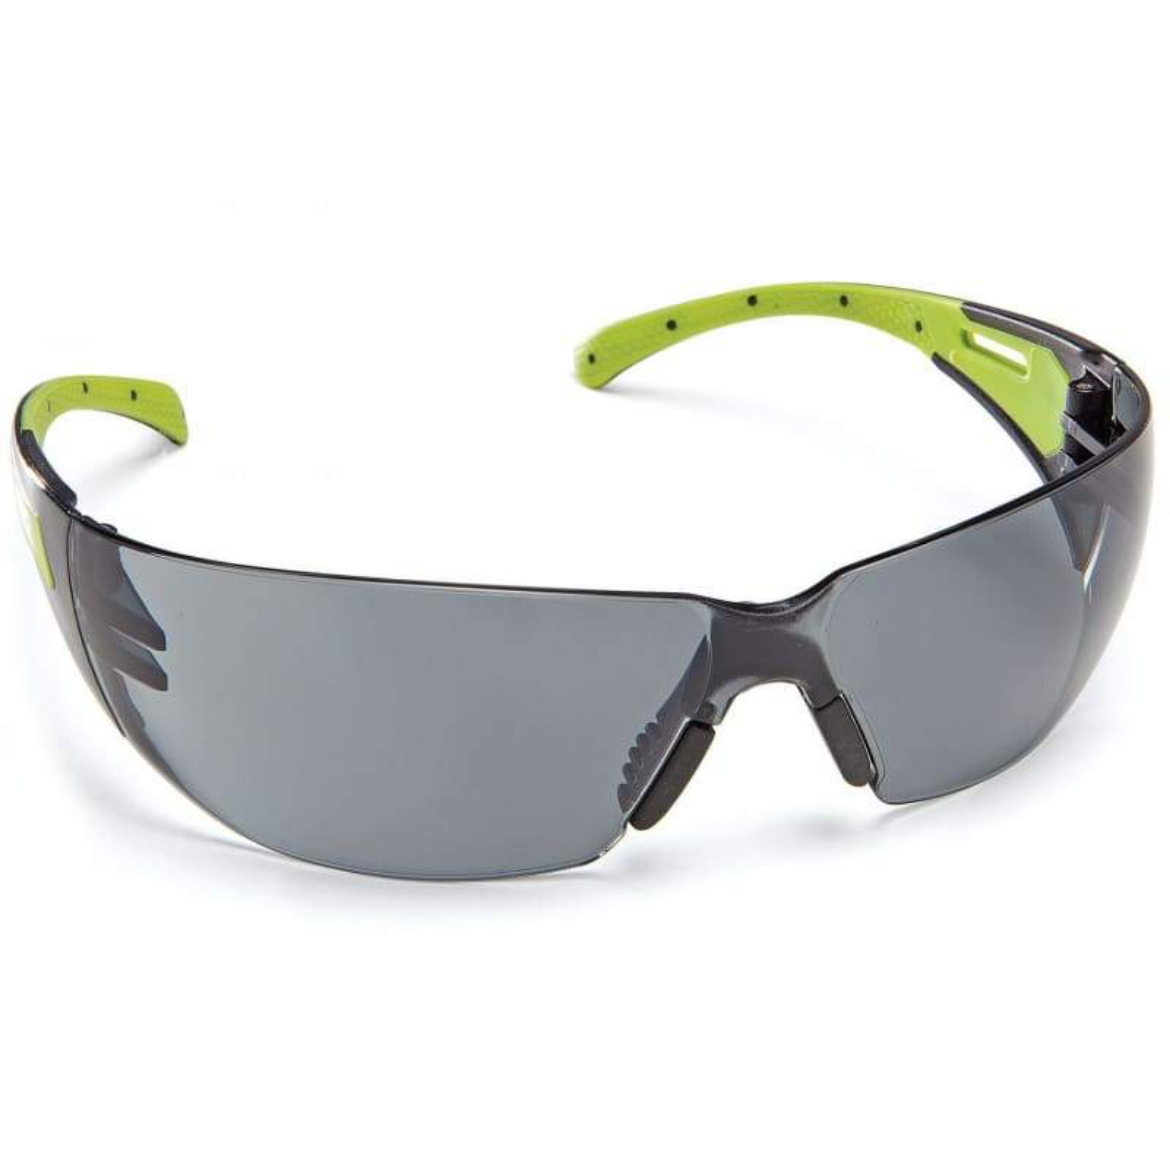 Picture of Force360 Eclipse Smoke Lens Safety Glasses